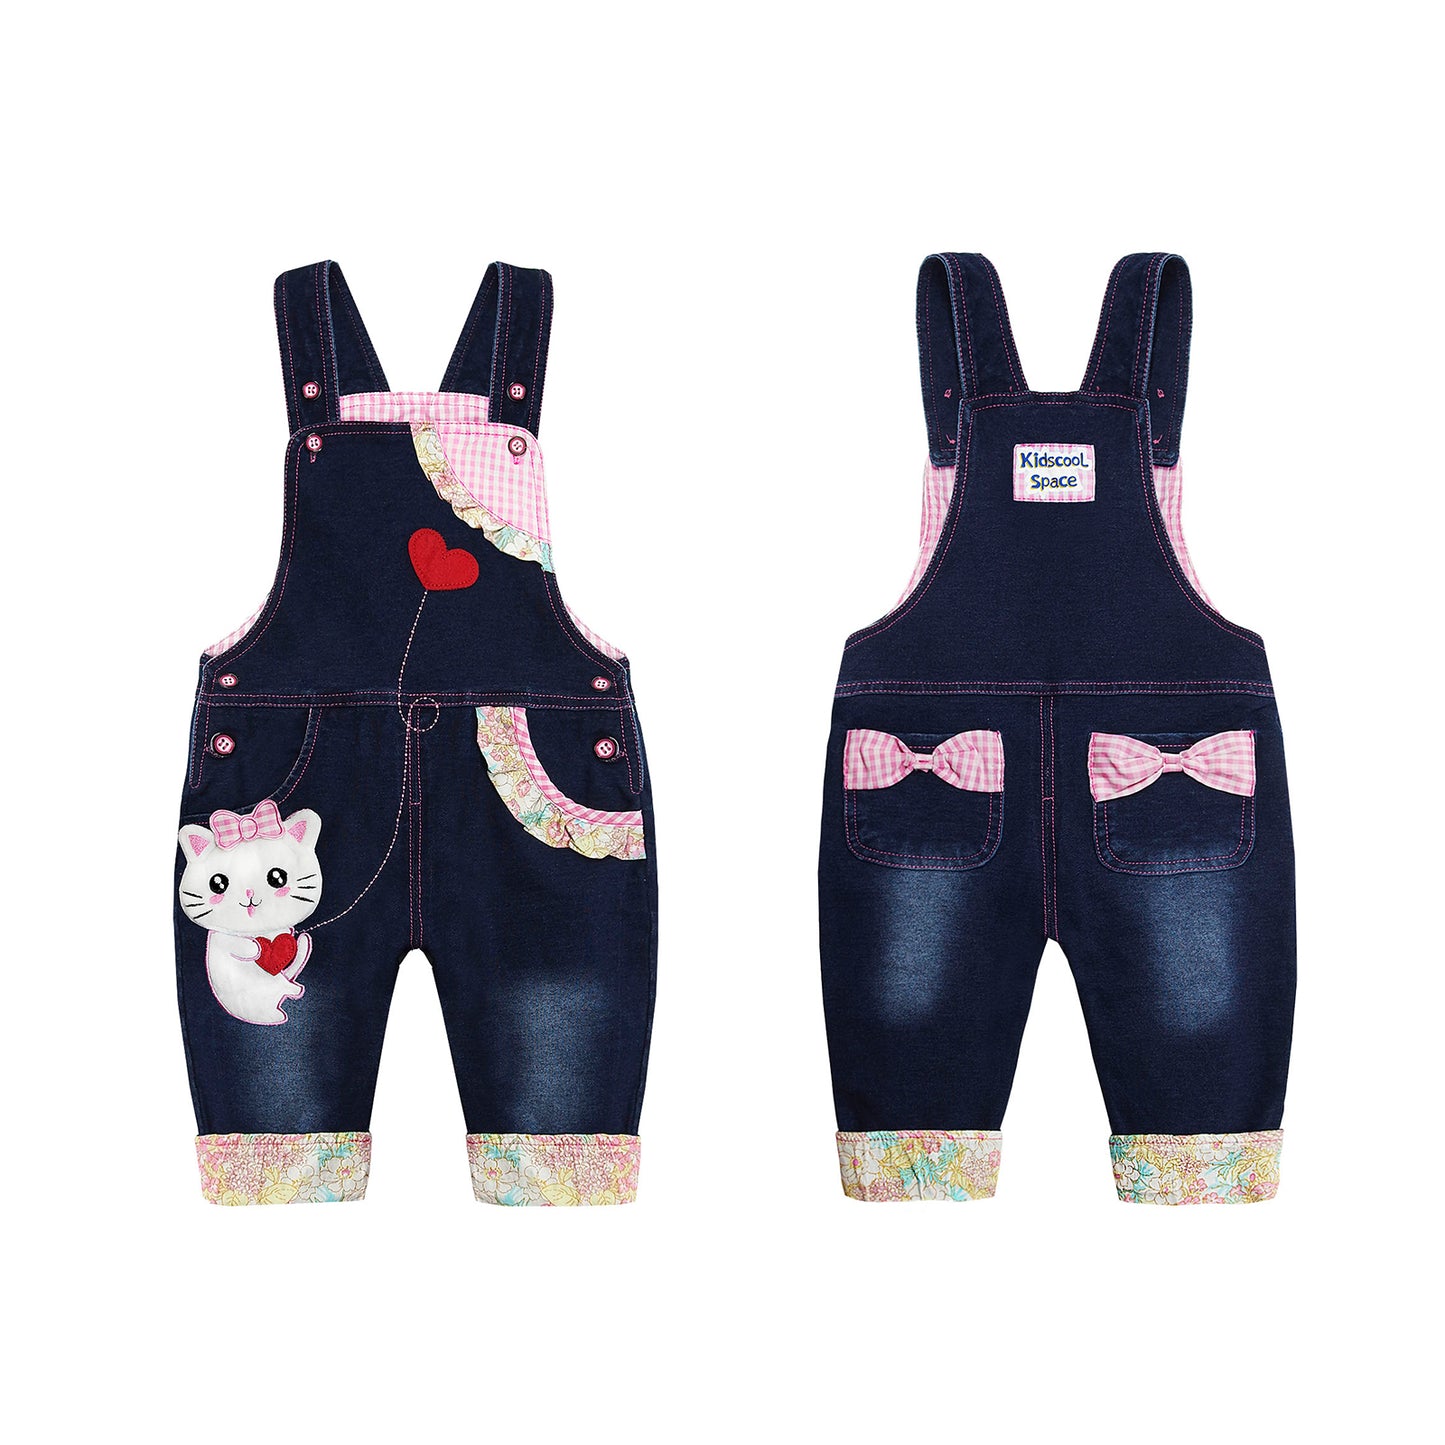 Cotton 3D Cartoon Soft Knitted Jeans Overalls